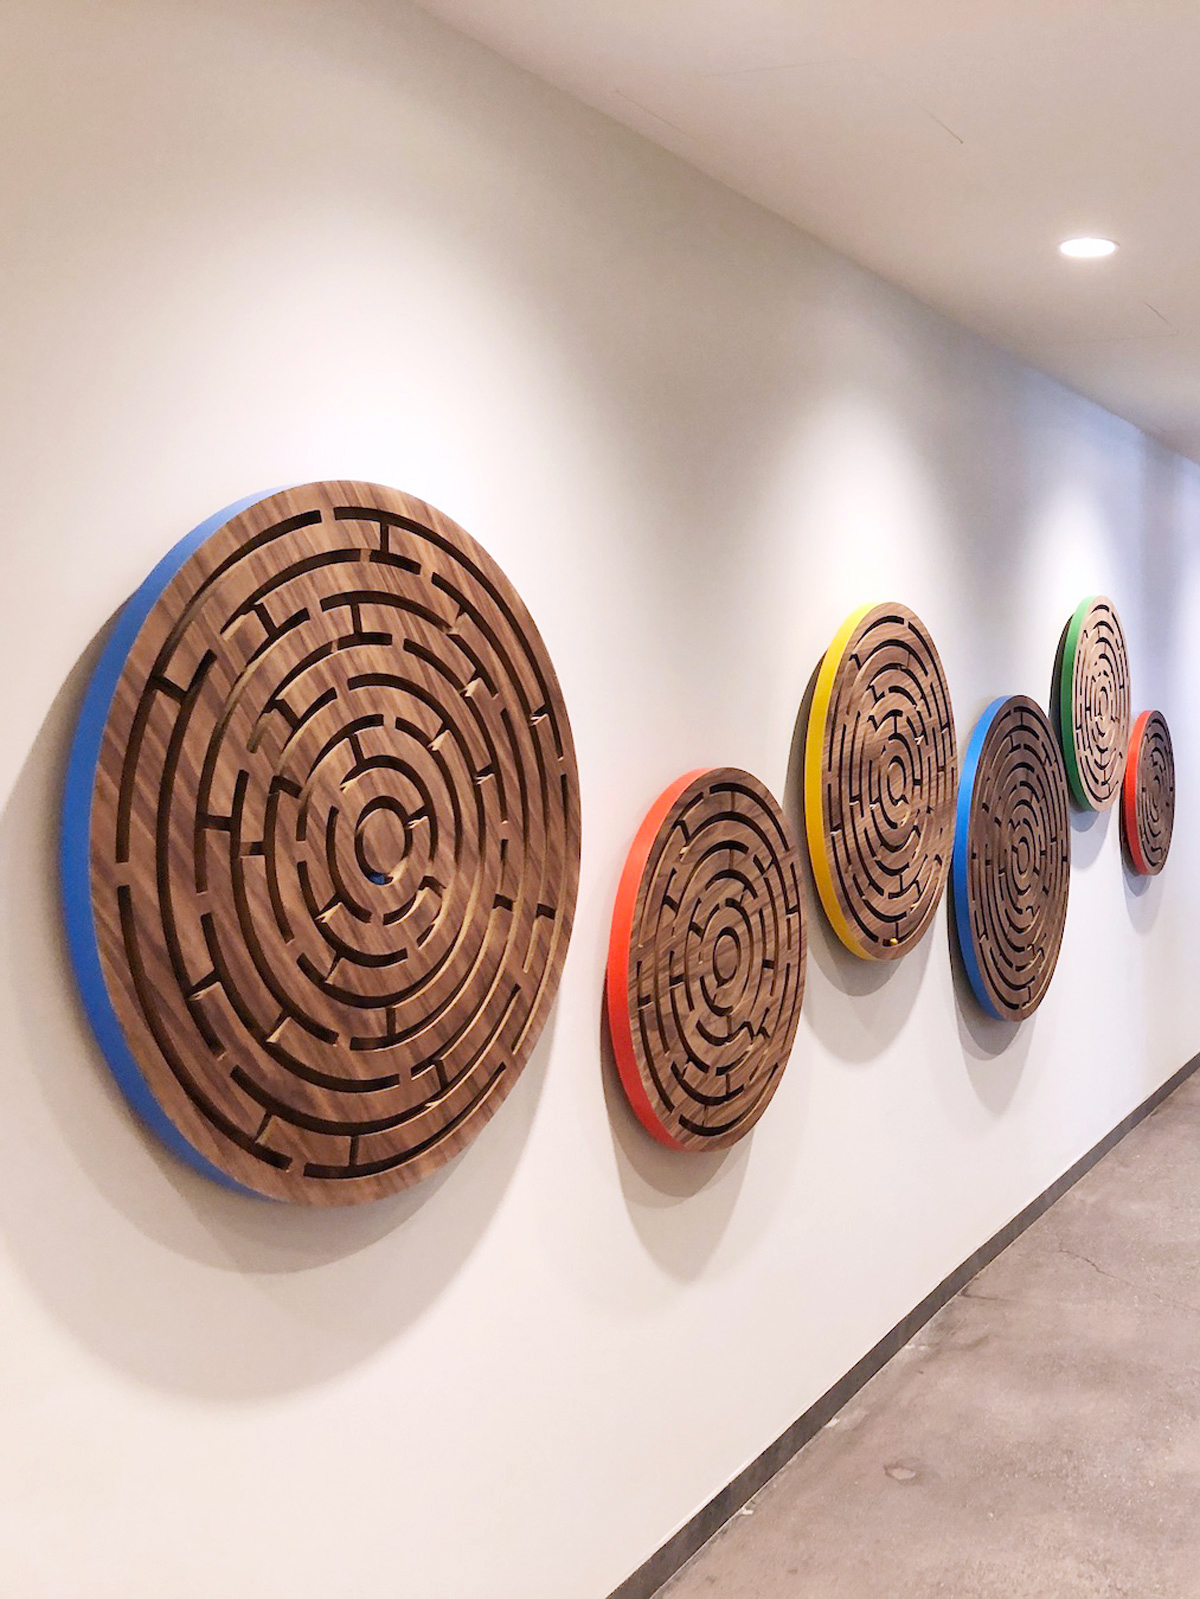 Wooden maze installation at Anagrams Cafe